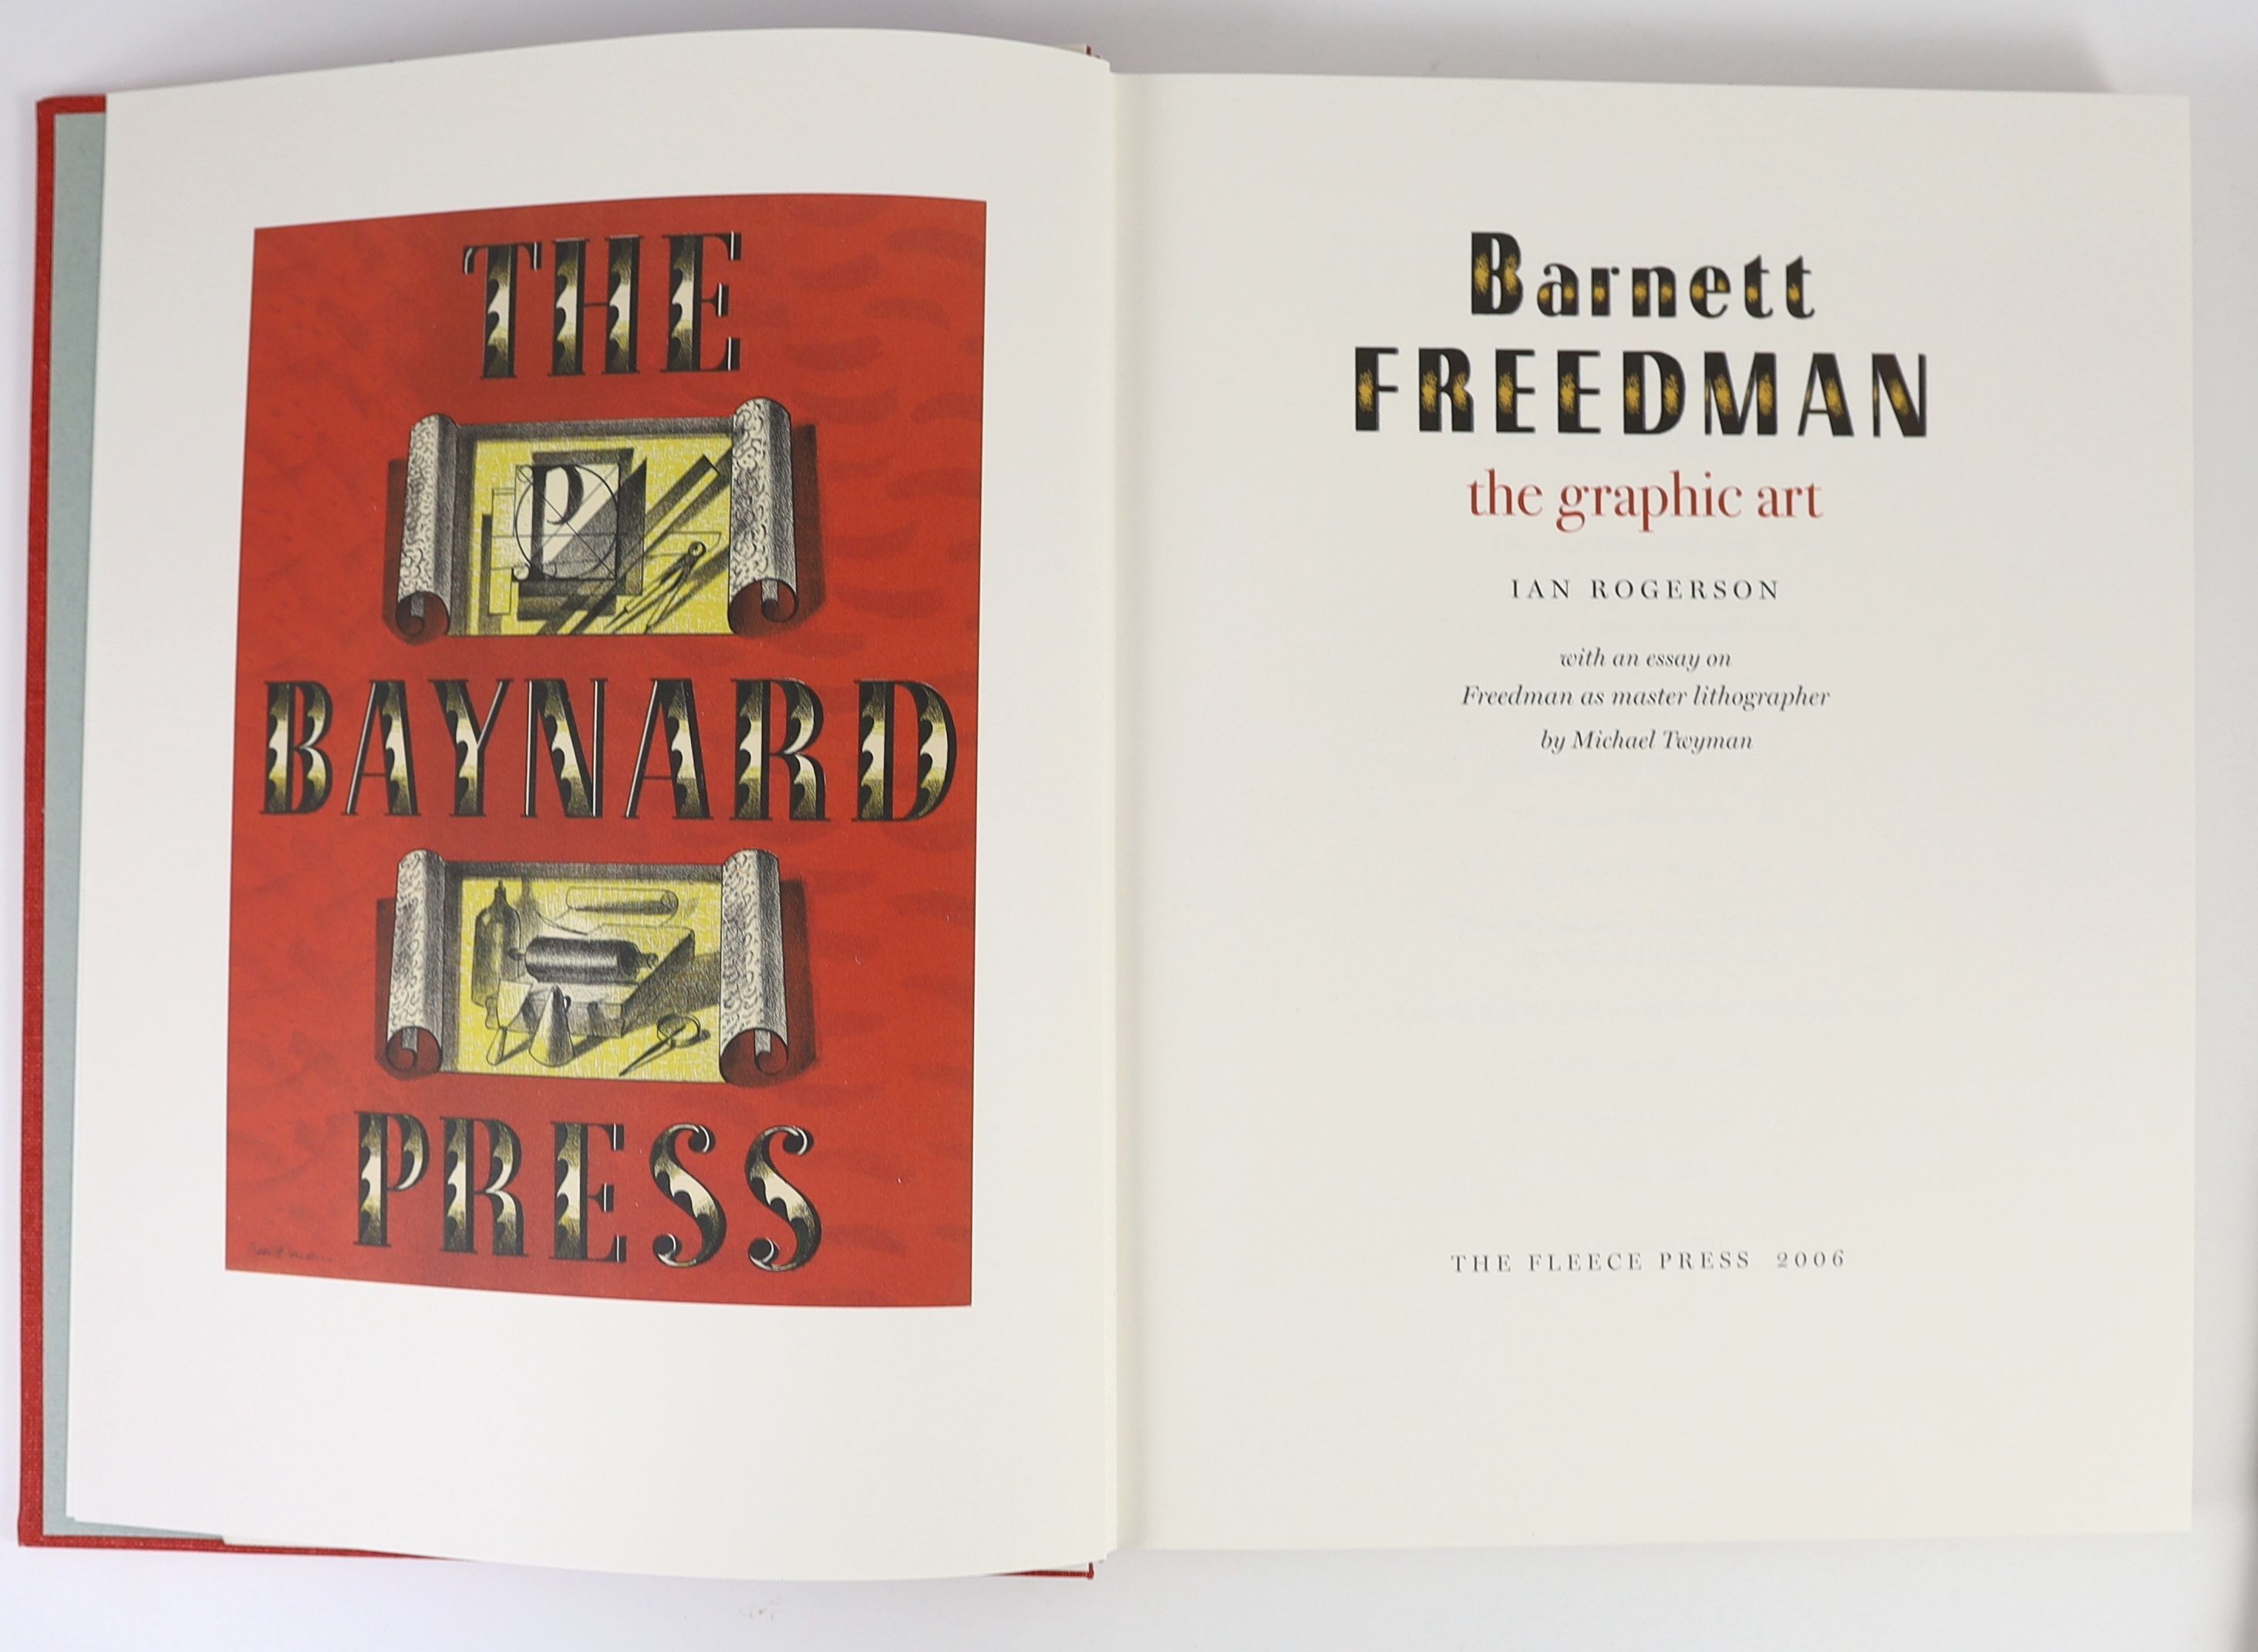 Rogerson, Ian - Barnett Freedman the Graphic Art, one of 240 with a loosely inserted card and one of 99 with printed facsimile for the diaspora of the Barnett Freedman Fan Club, folio, orange cloth, with a DVD in rear po